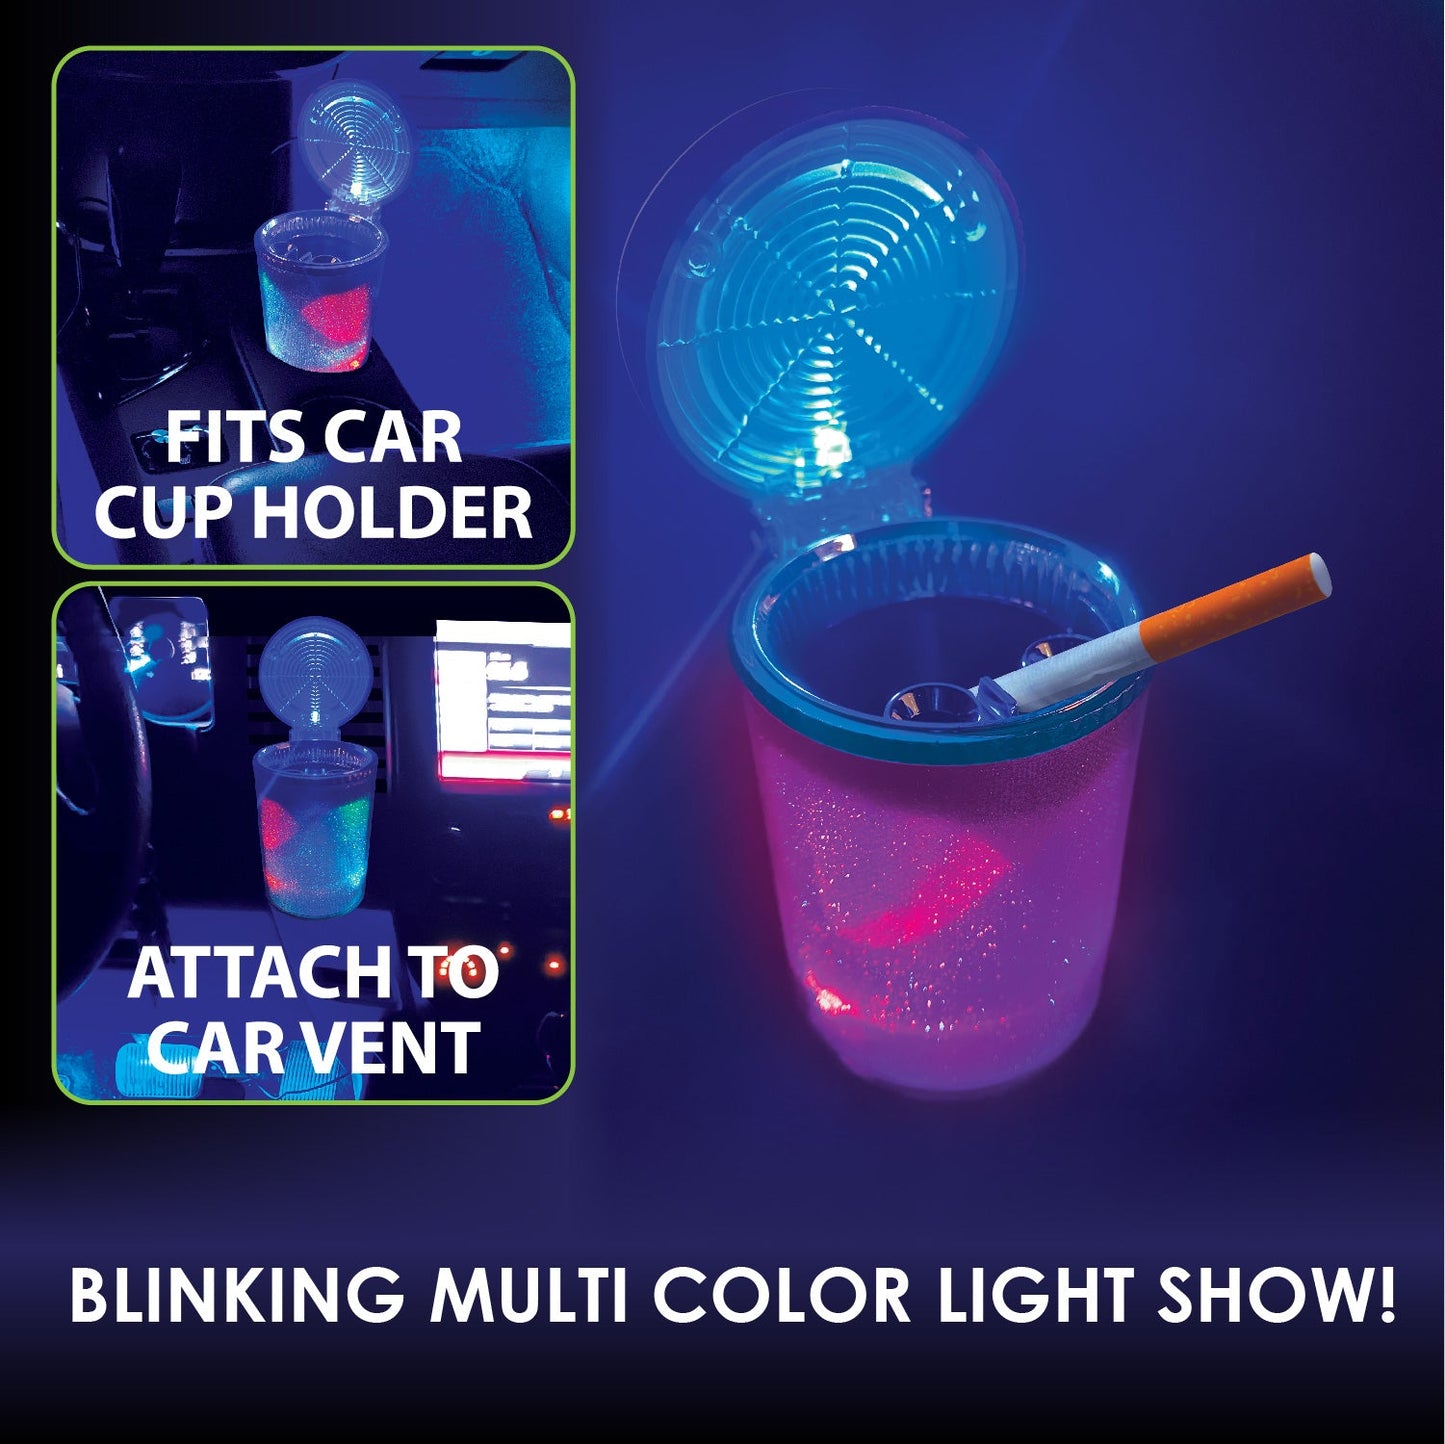 ITEM NUMBER 023532L LIGHT SHOW BUTT BUCKET - STORE SURPLUS NO DISPLAY 6 PIECES PER PACK